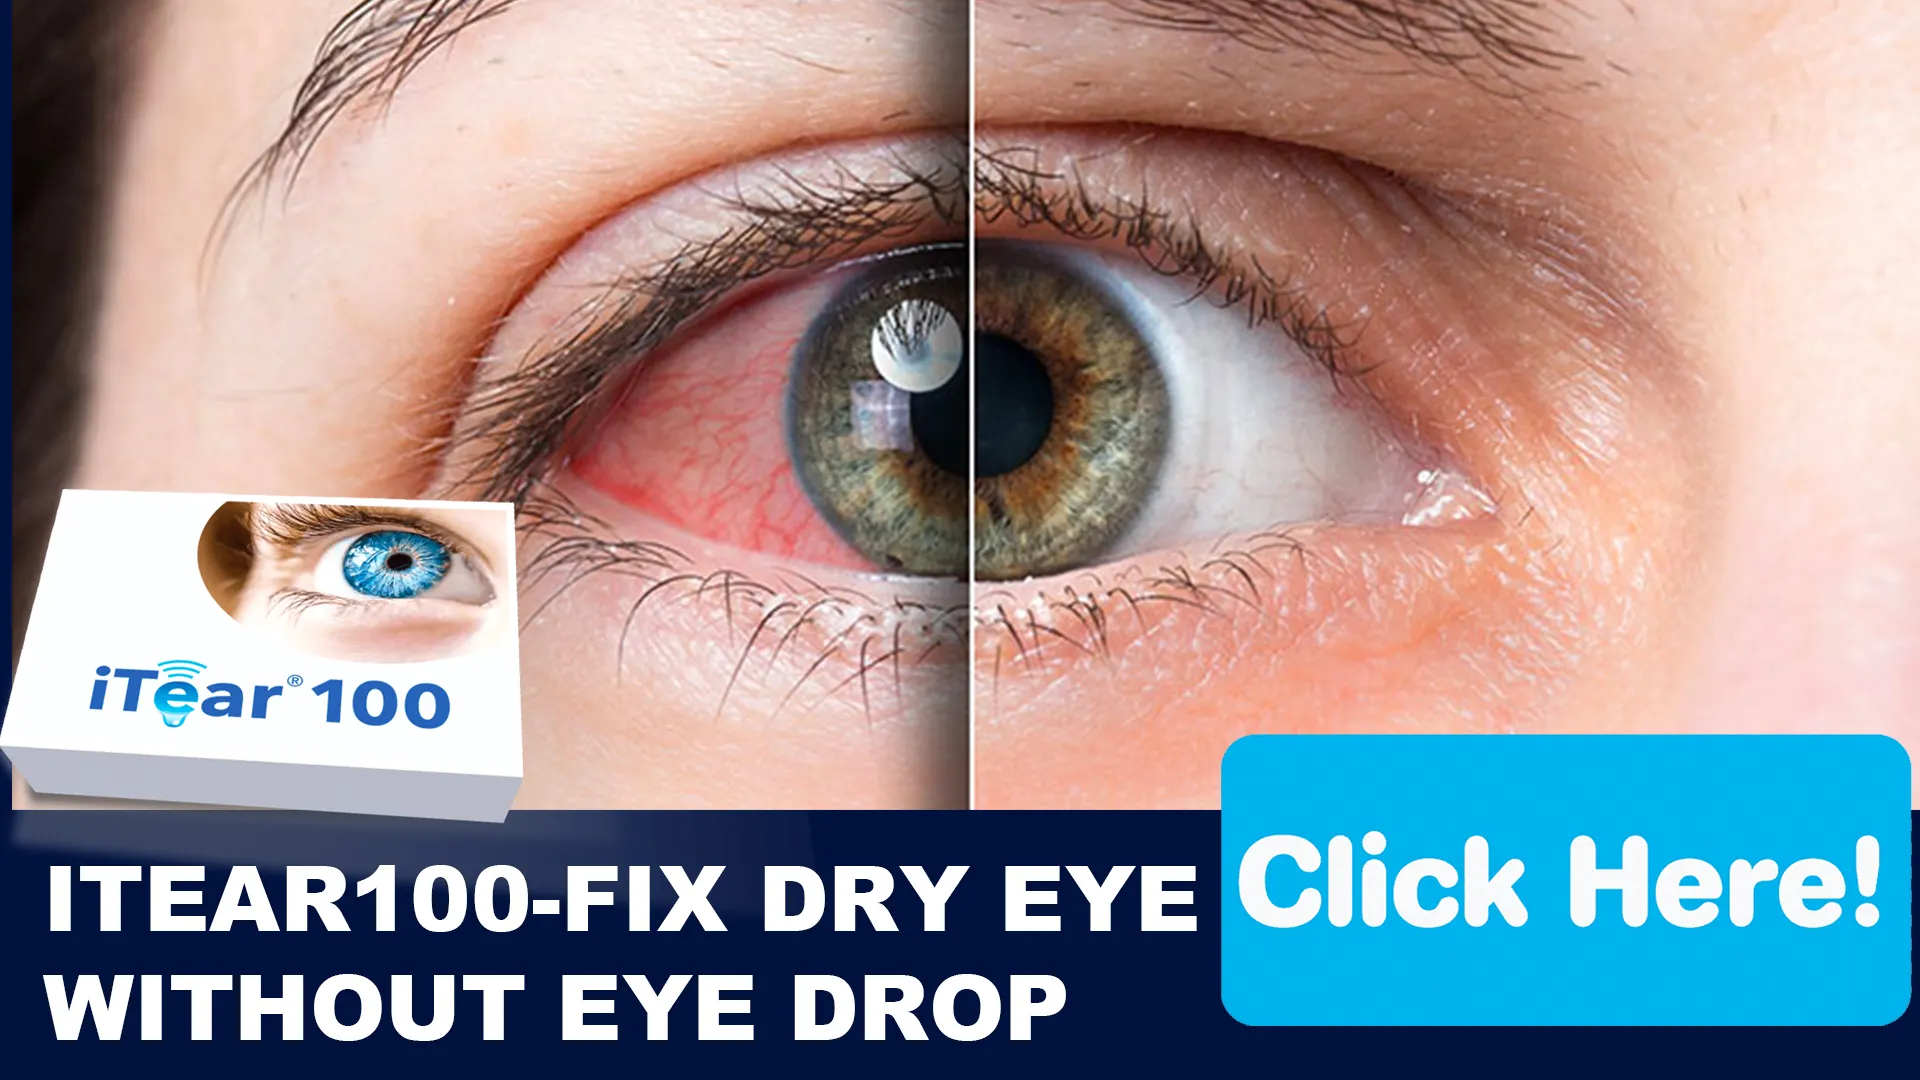 A Closer Look at Dry Eye: What Causes It?